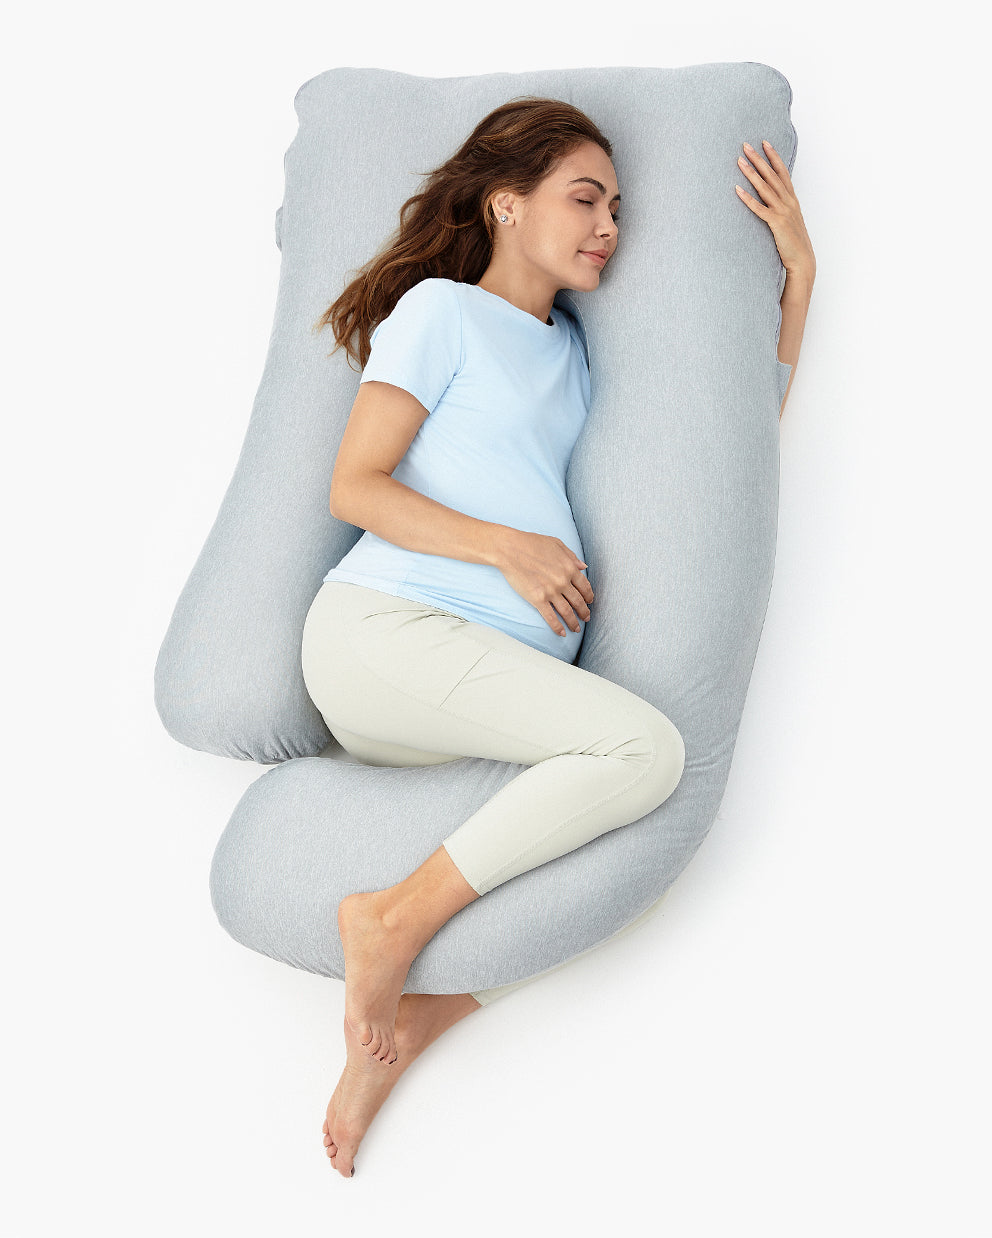 Body Pregnancy Pillow That's Soft, Comfortable, and Cooling